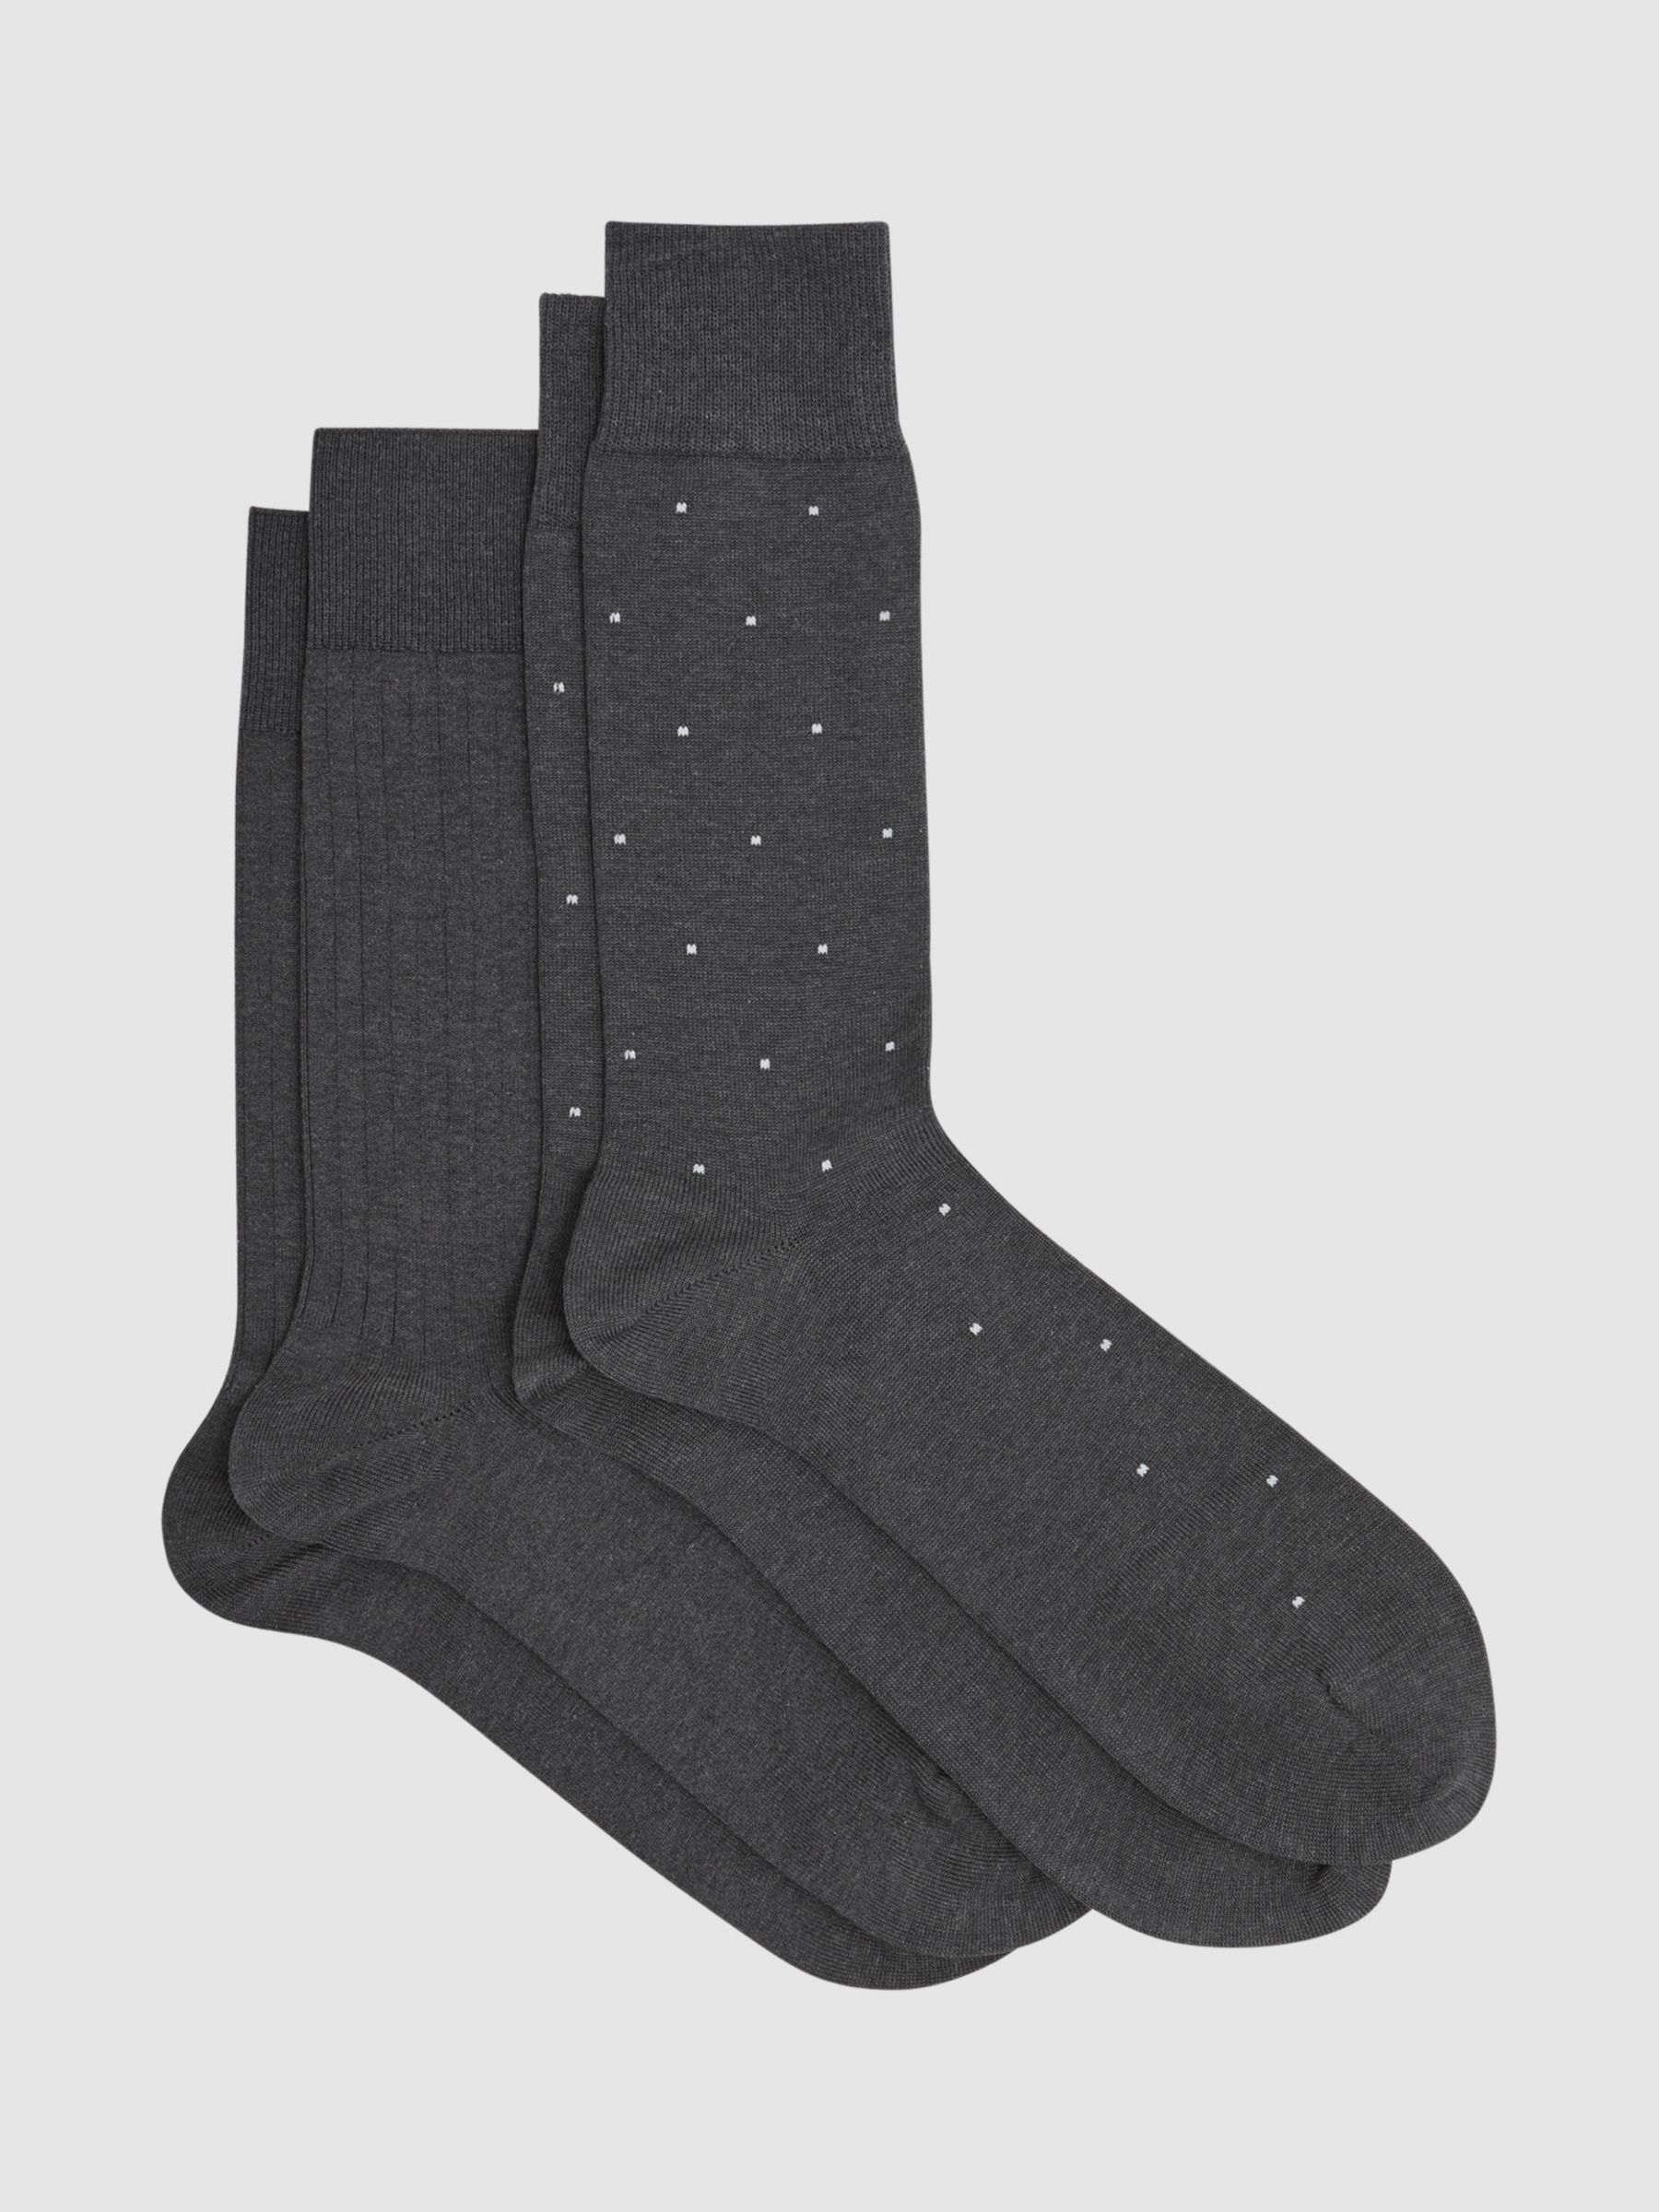 Buy Reiss Graham Ribbed and Spot Cotton Blend Socks, Pack of 2 Online at johnlewis.com